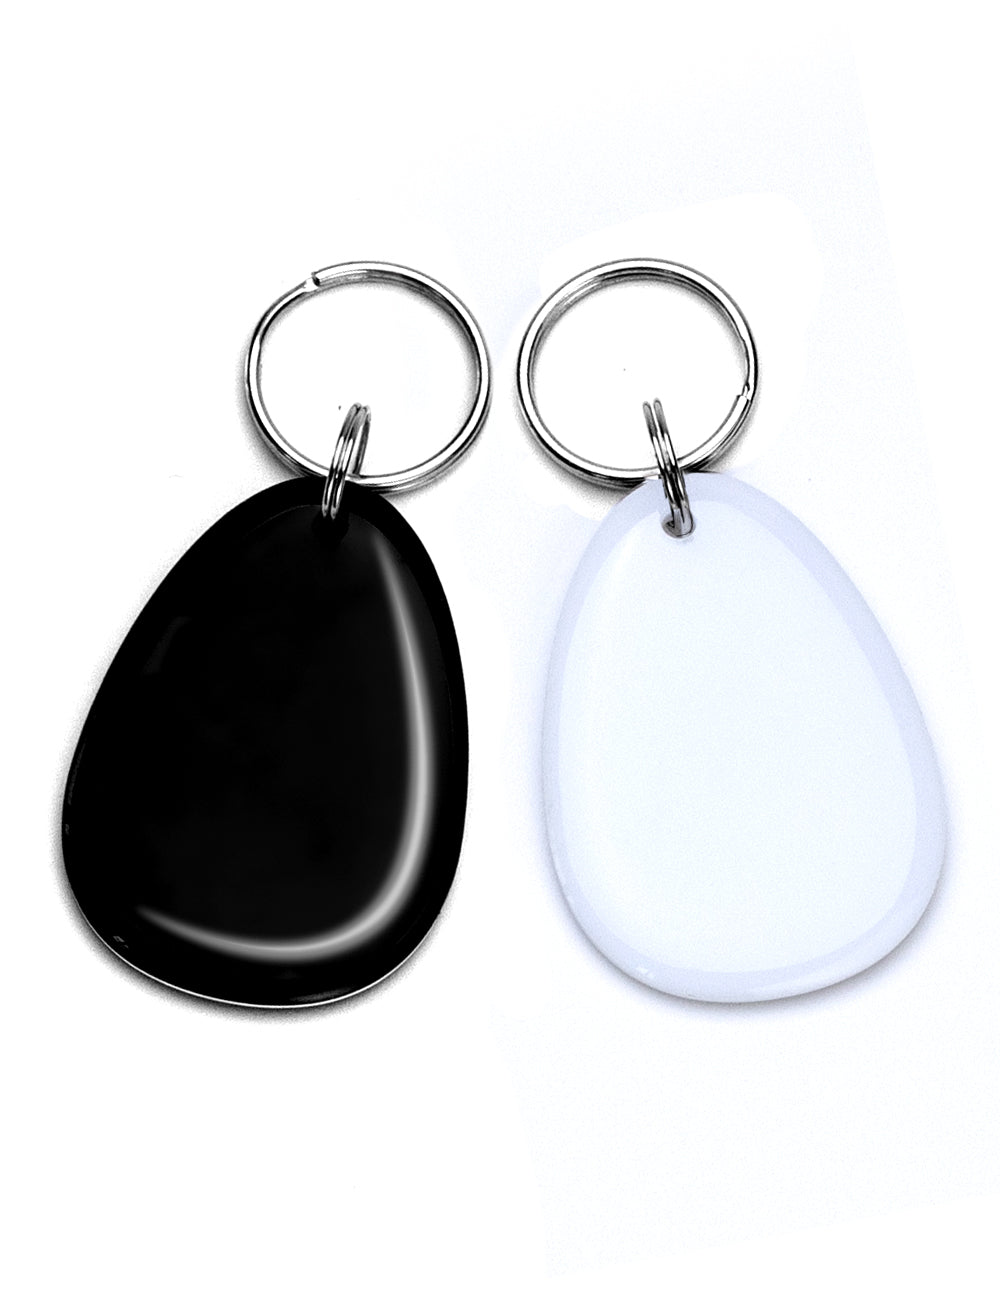 RexID Rewritable 125KHz Blank Keyfob Tag Working with RexID Programmer for Flexible Programming of Different Custom Formats,Facility Codes,and ID Range for On-Demand Production